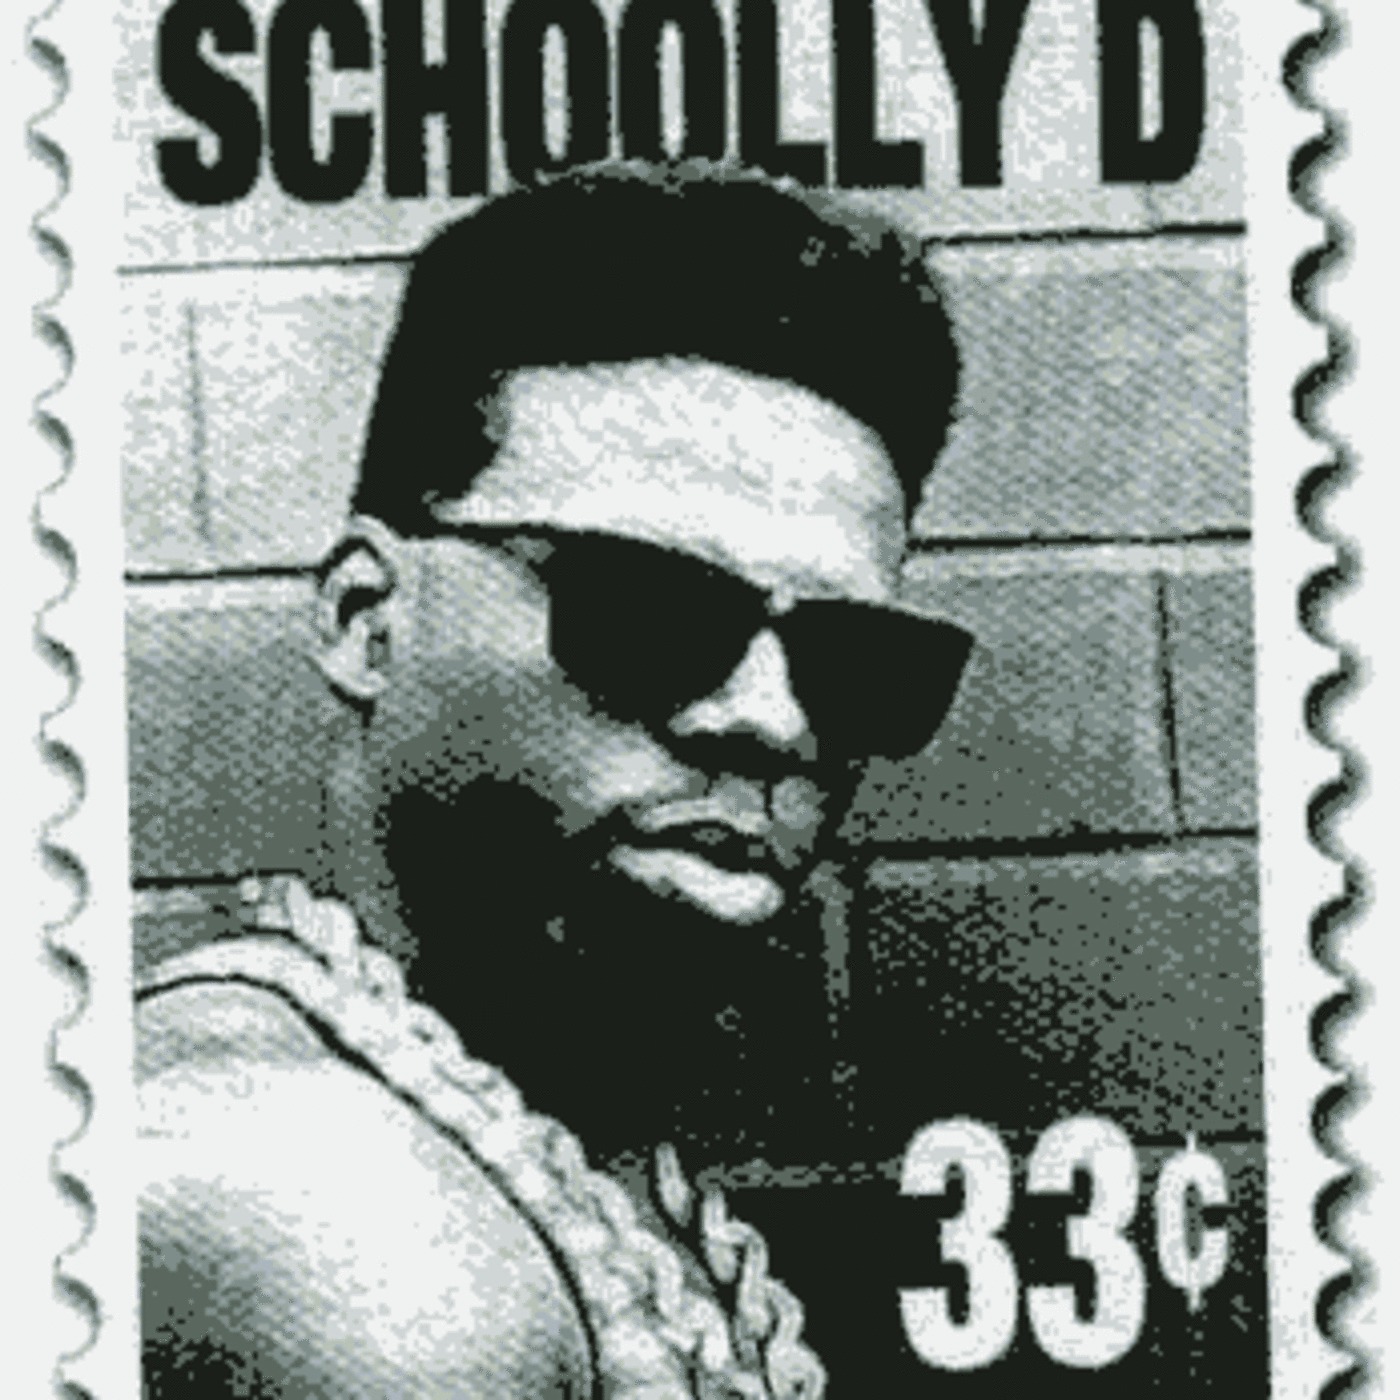 DJMARCD AND MIXSHOW 24-7...ON NOW FT. SCHOOLLY D-LOOKIN' AT MY GUCCI(AGAIN)